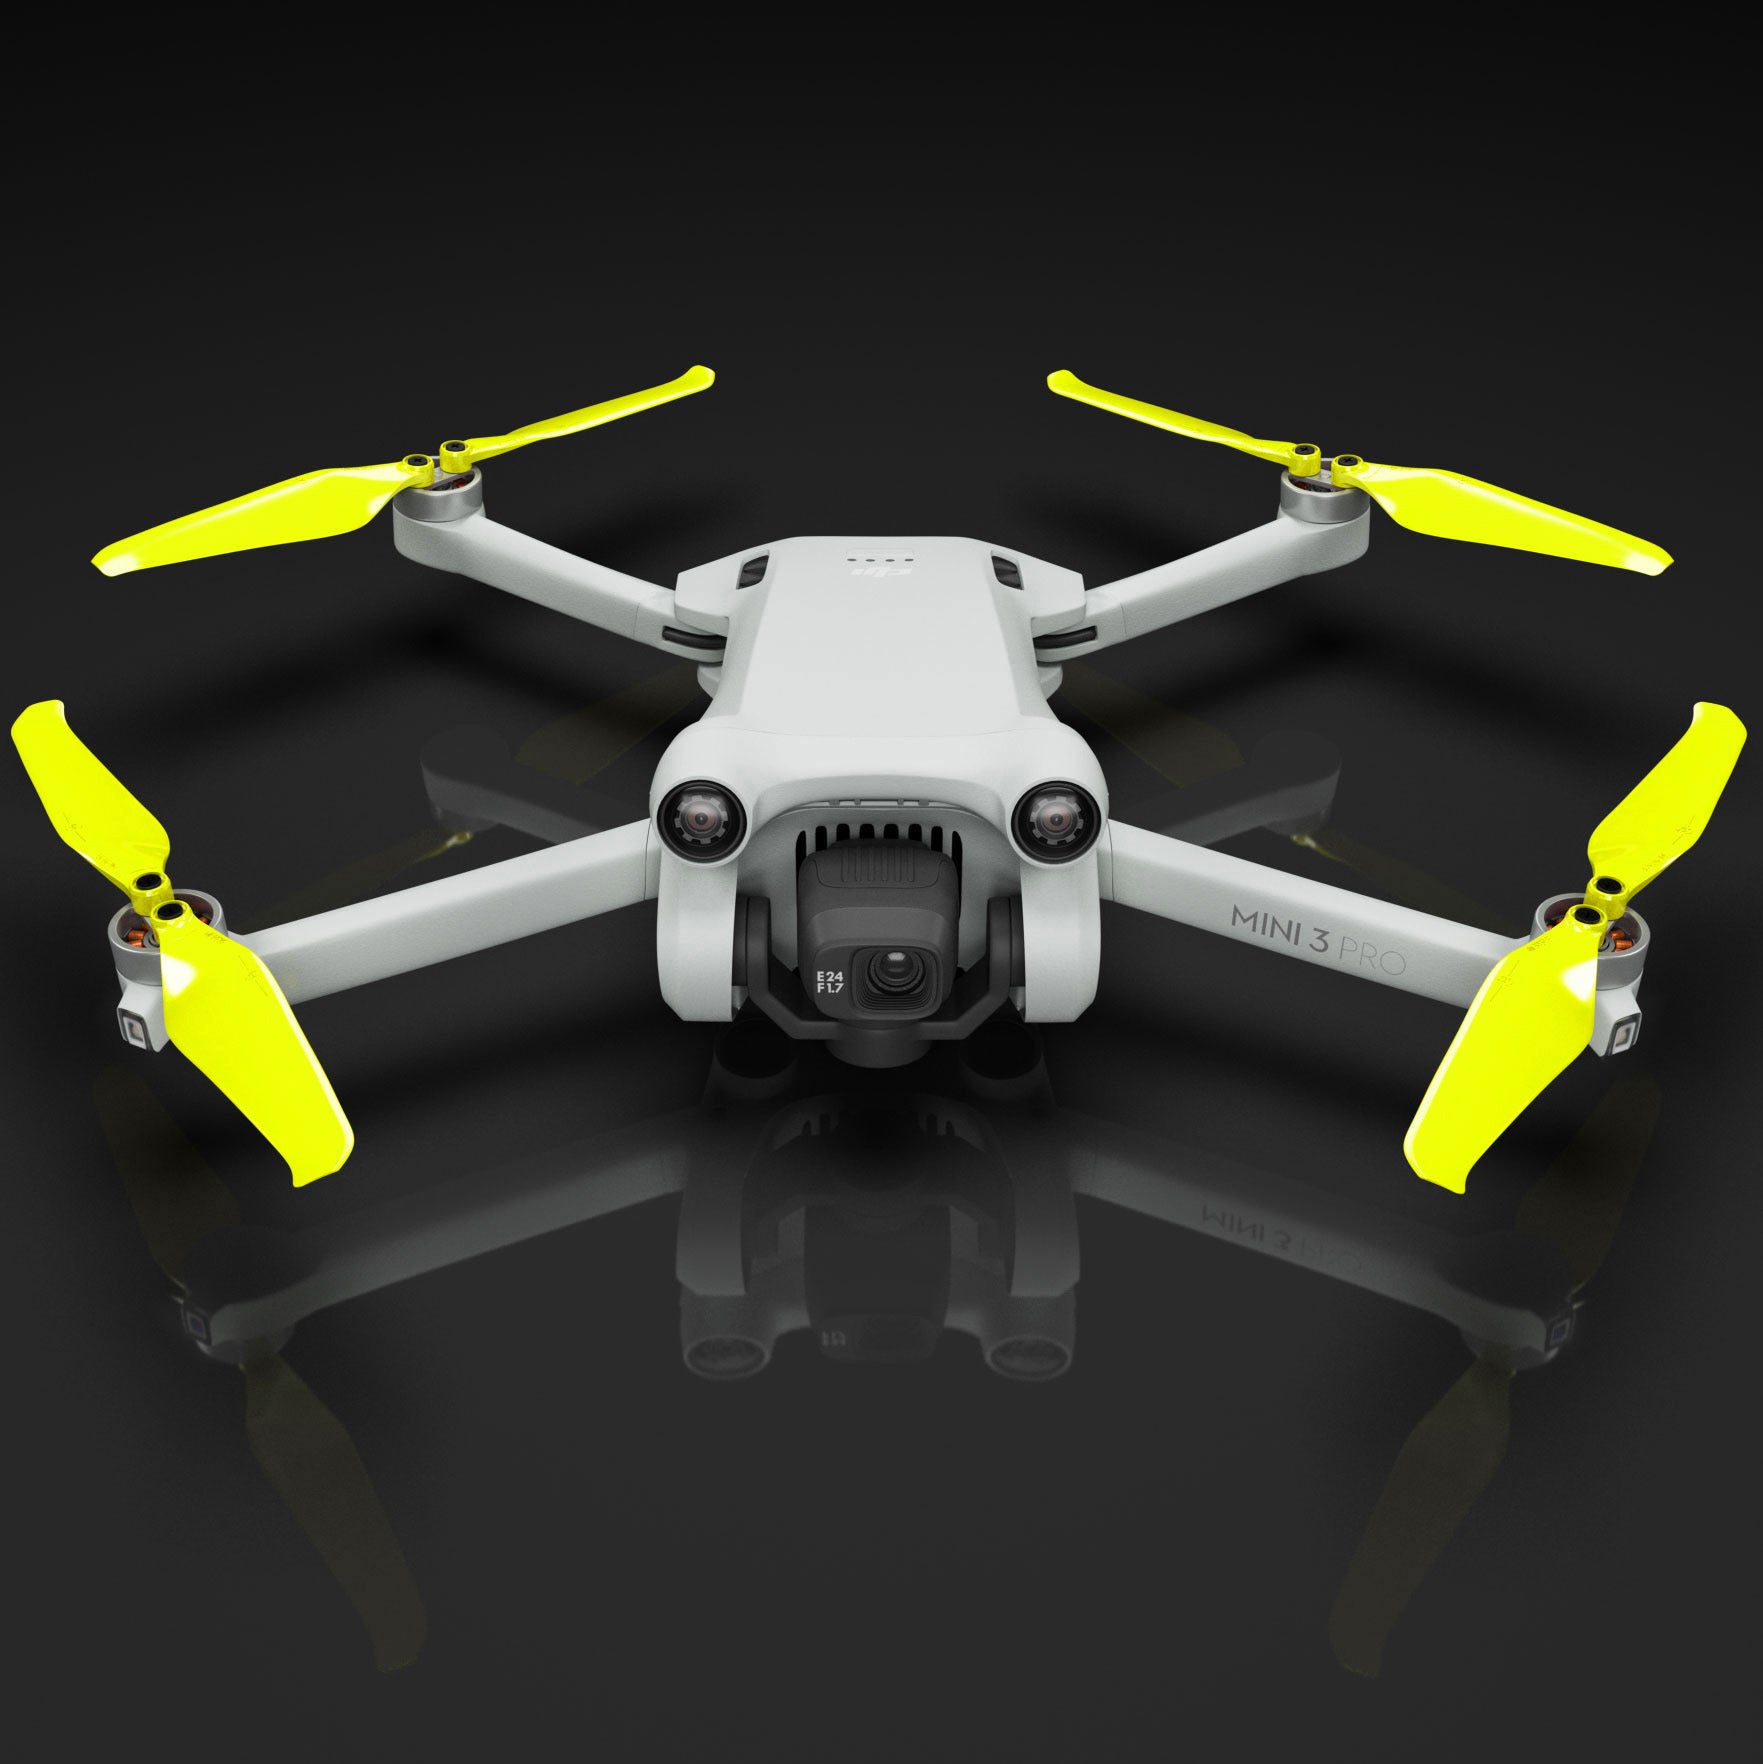 Let's talk about the DJI Mini 3 Pro Drone